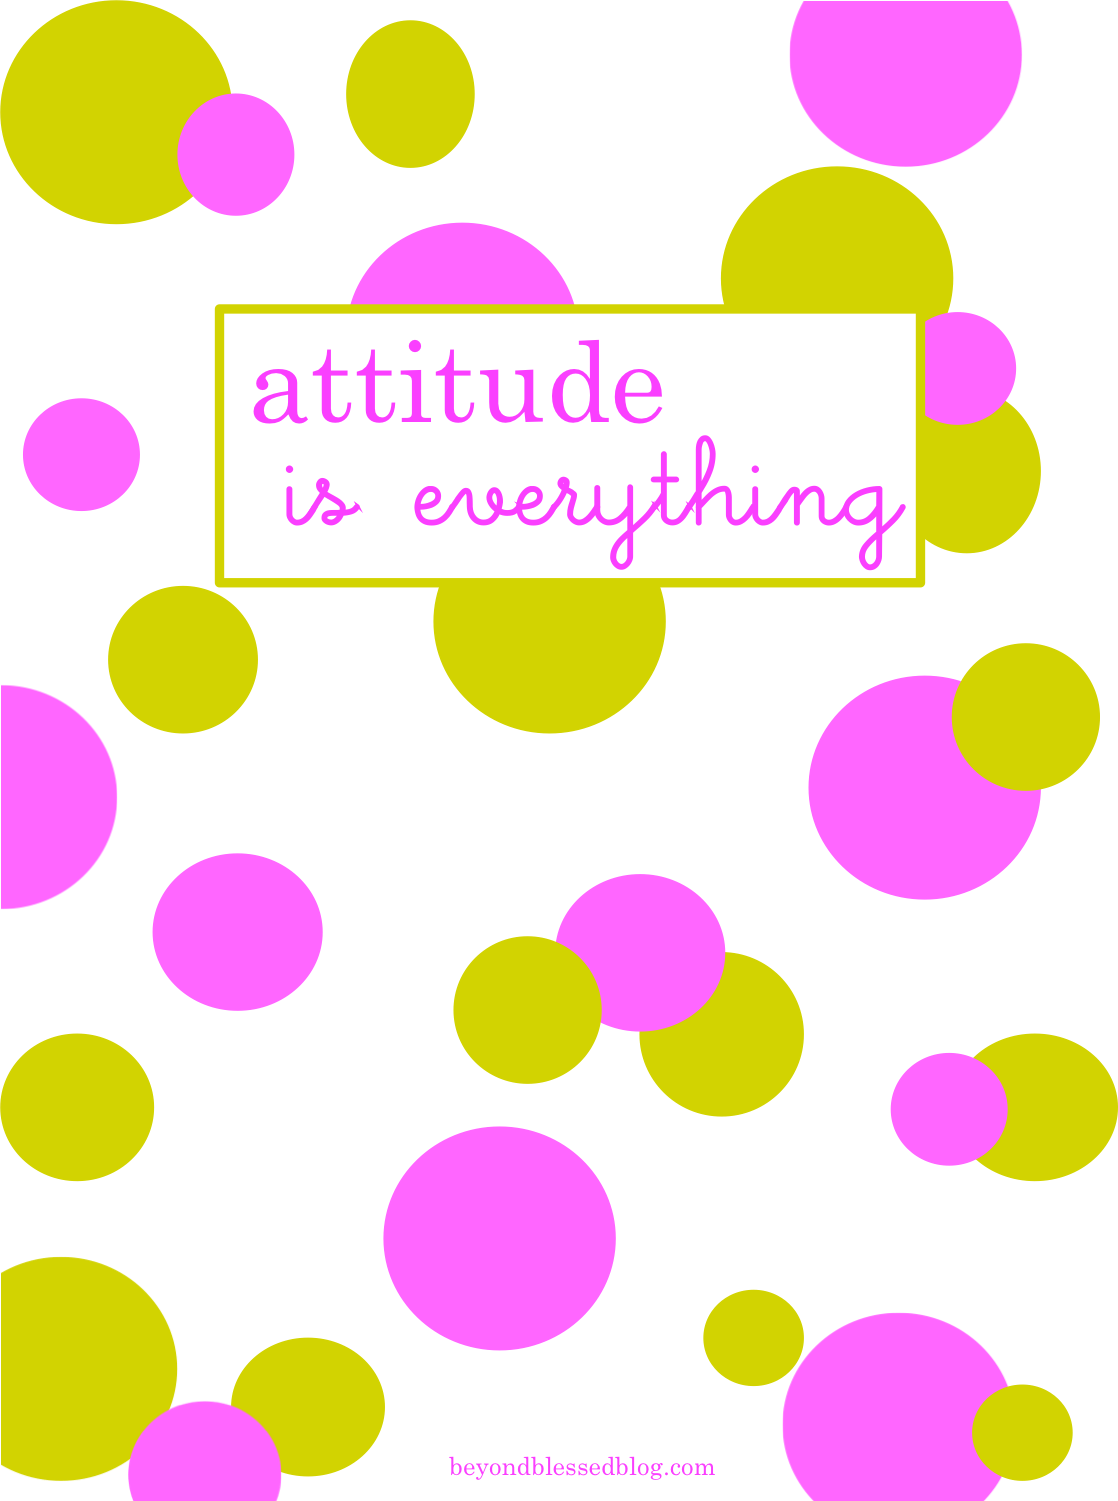 Attitude is everything BBB